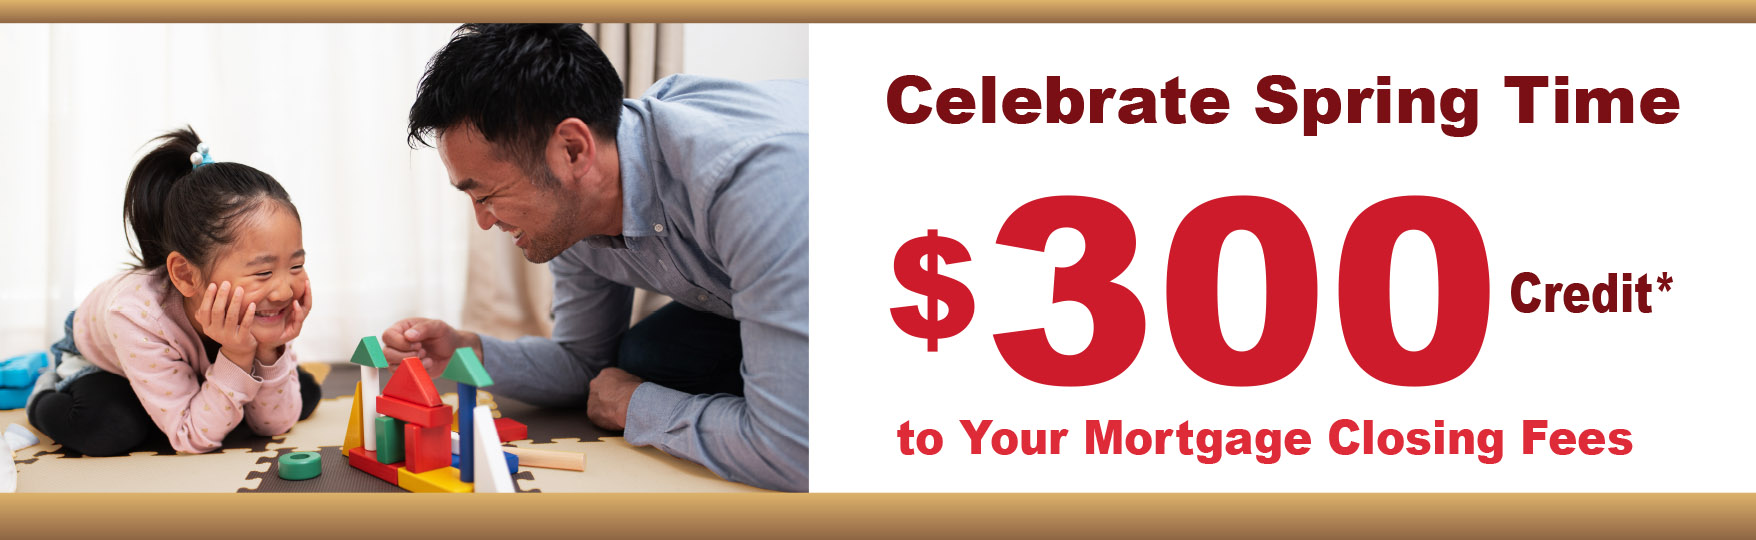 Celebrate Spring Time
$300 Credit* to your mortgage closing fees